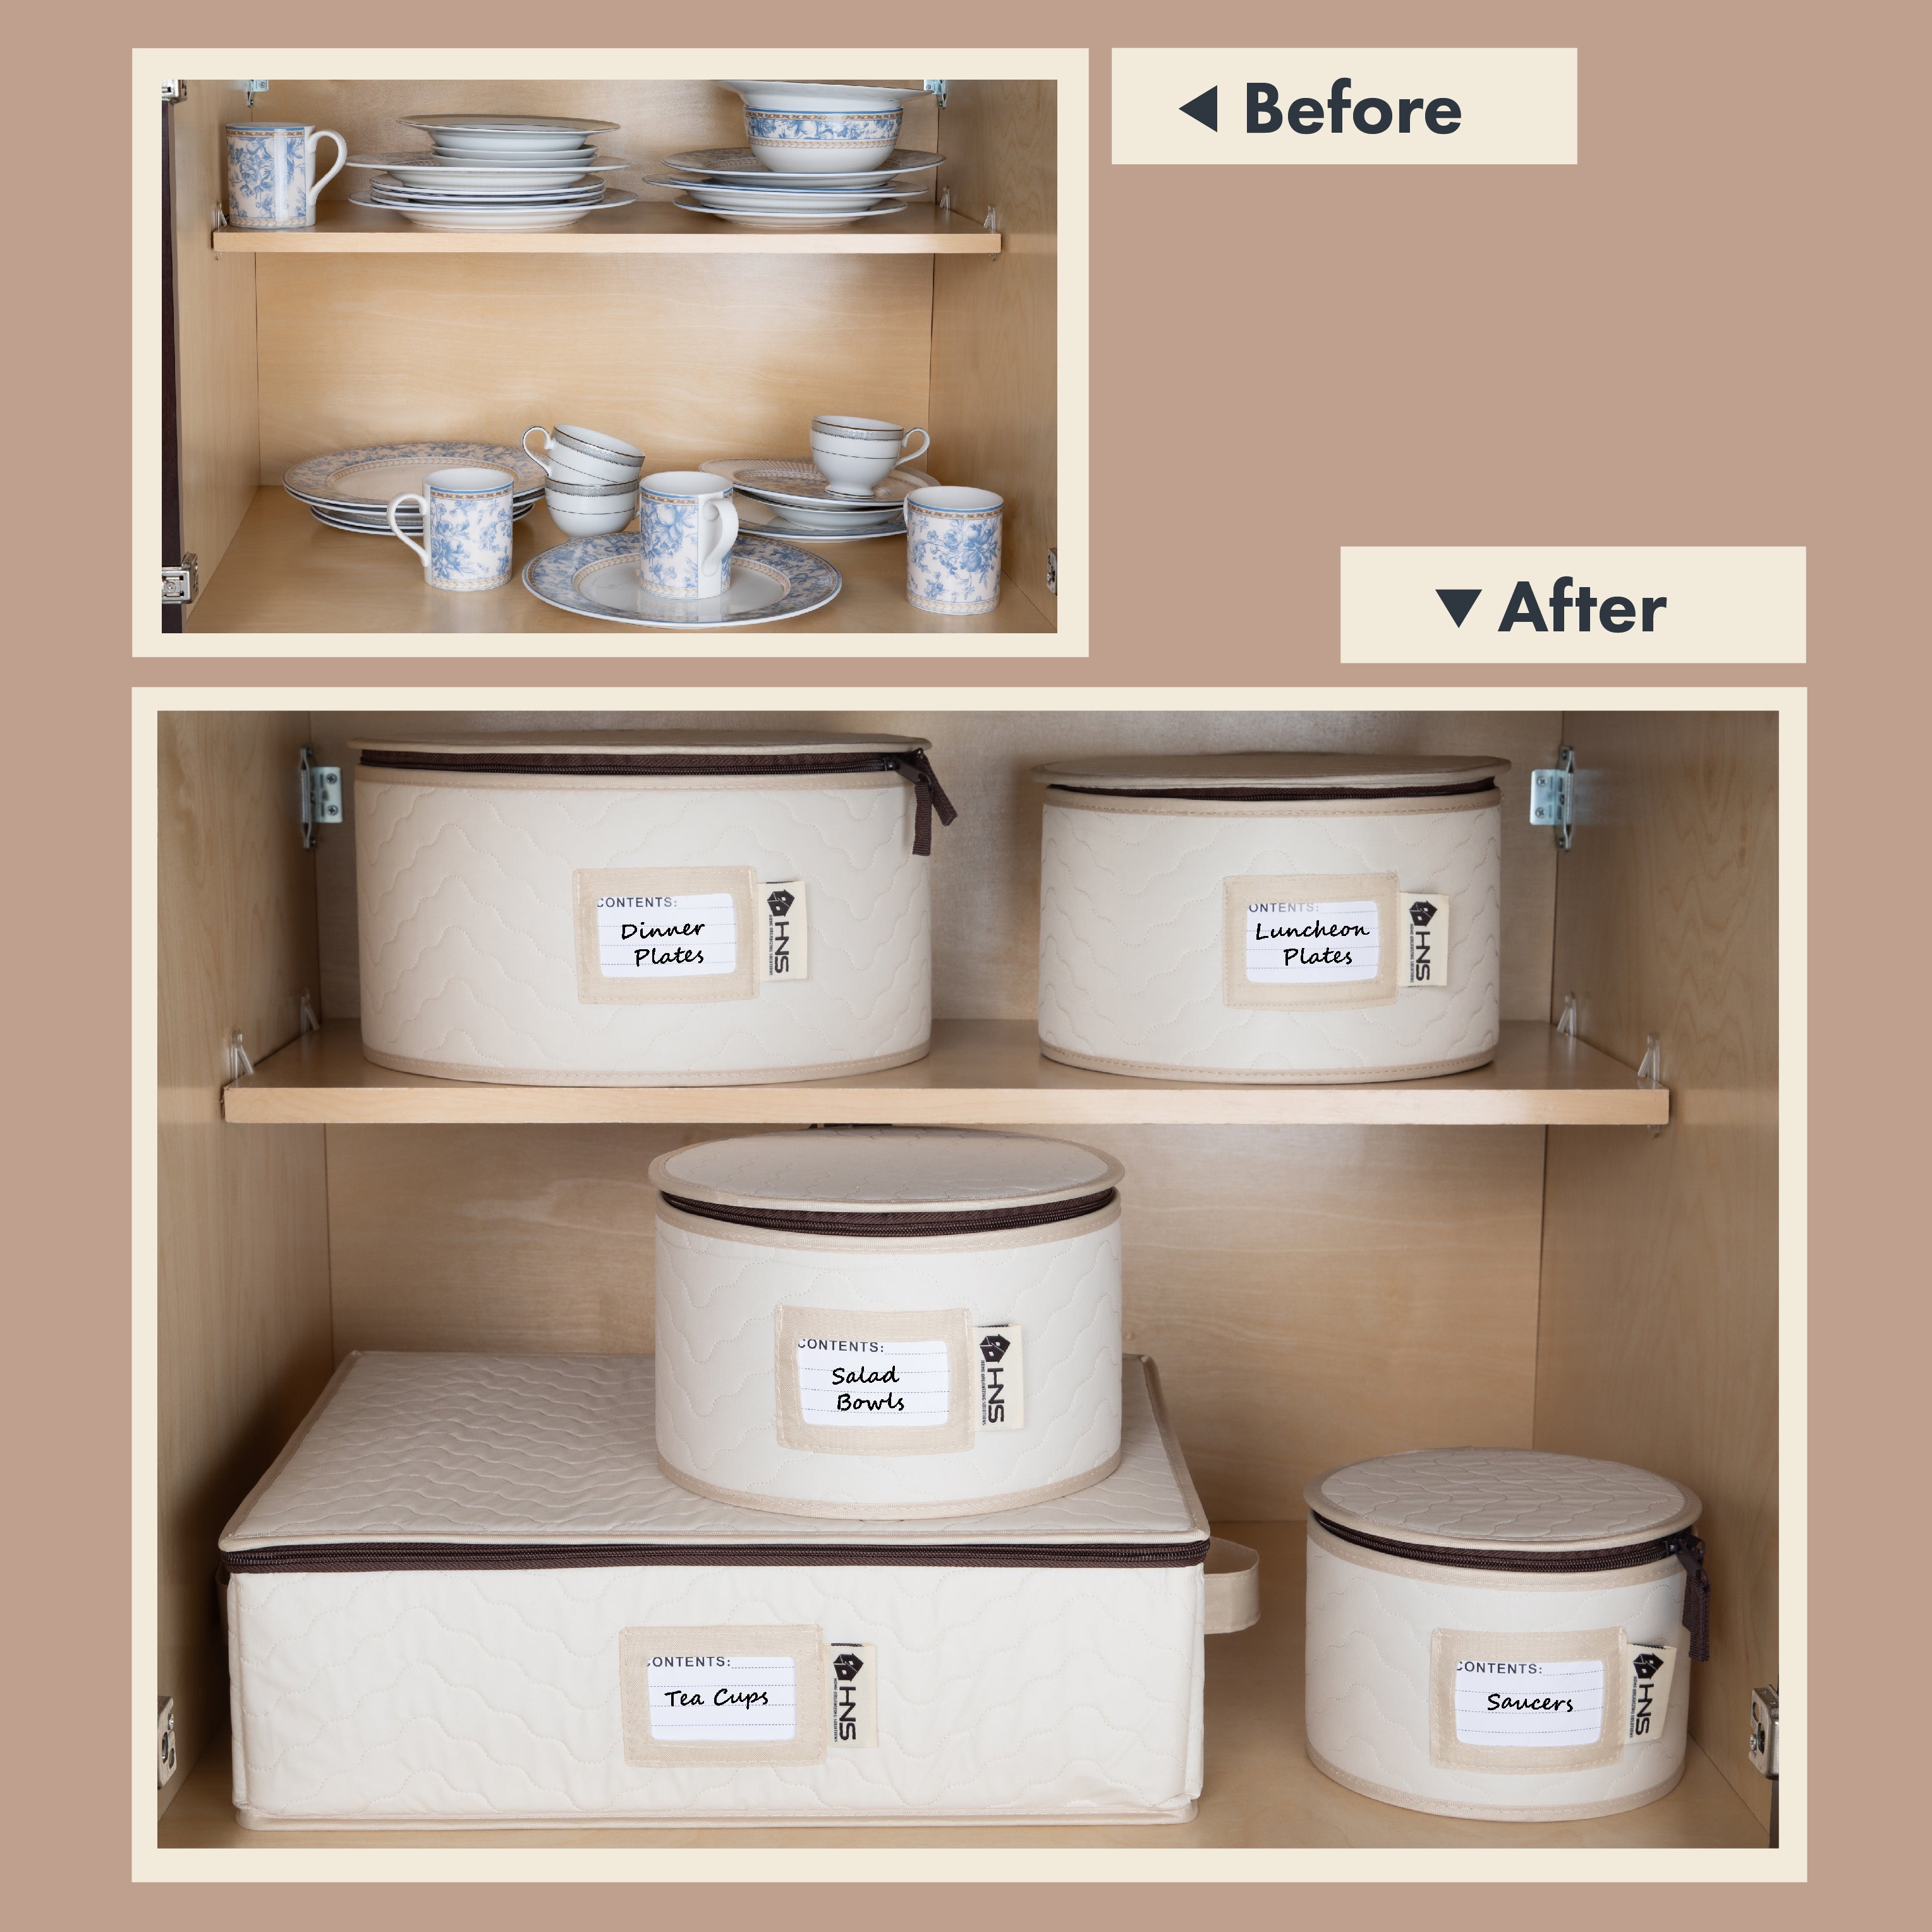 Hard Shell China Storage Containers 5-Piece Set Moving Boxes for Dinnerware, Glasses, Plates, Mugs and Saucers Sturdy Dish Organizer with Dividers for Seasonal Storage - Service for 12